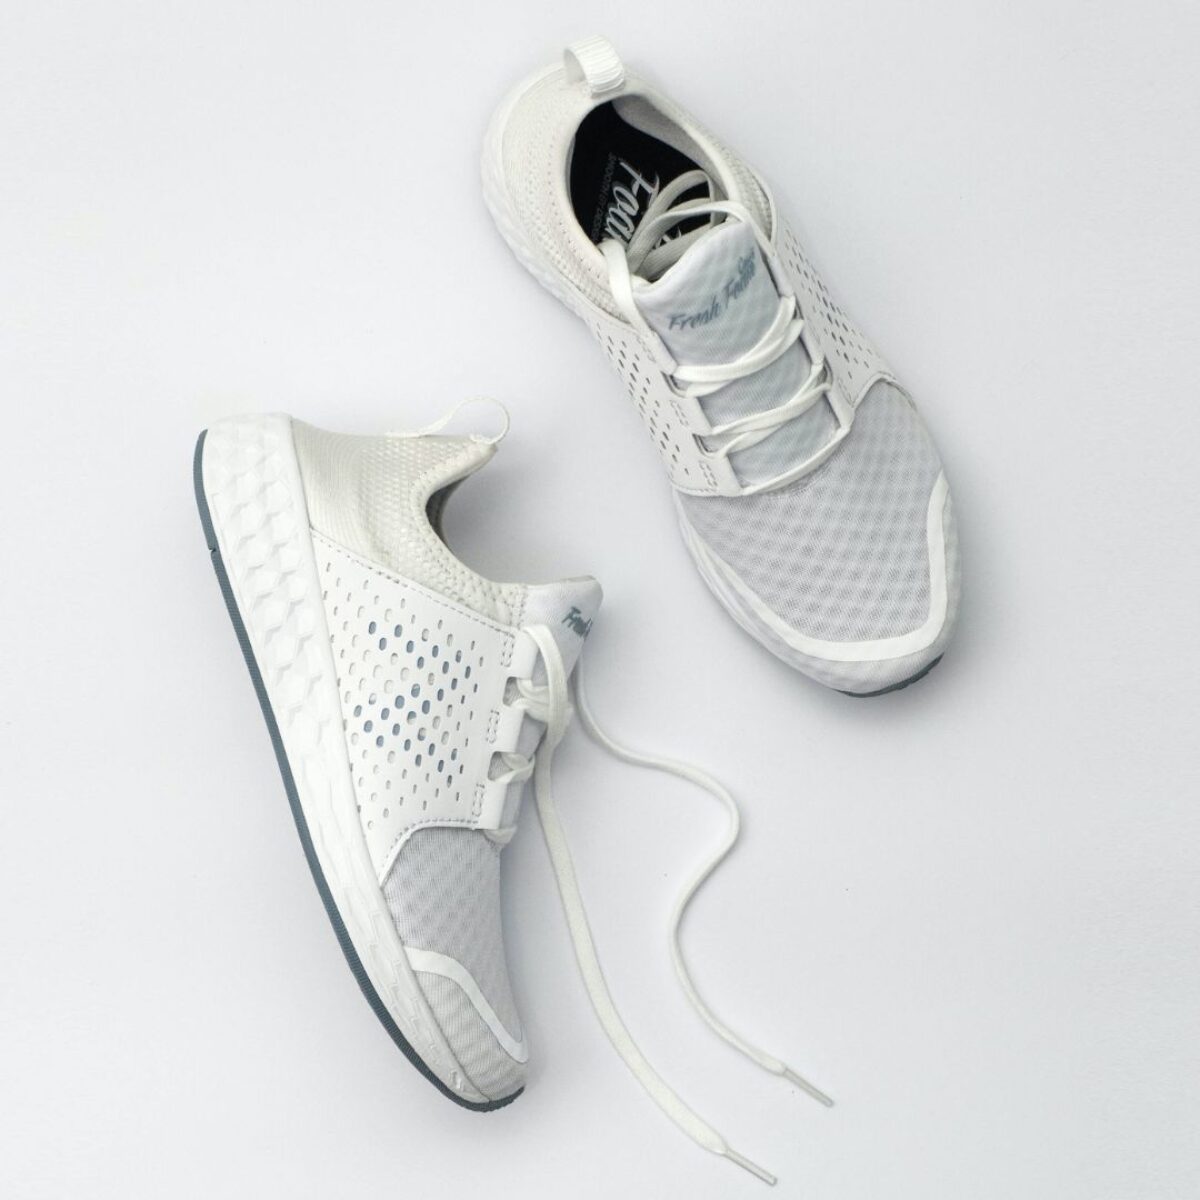 Men's white sneaker shoes: Top picks under 3000 - Times of India (October,  2023)